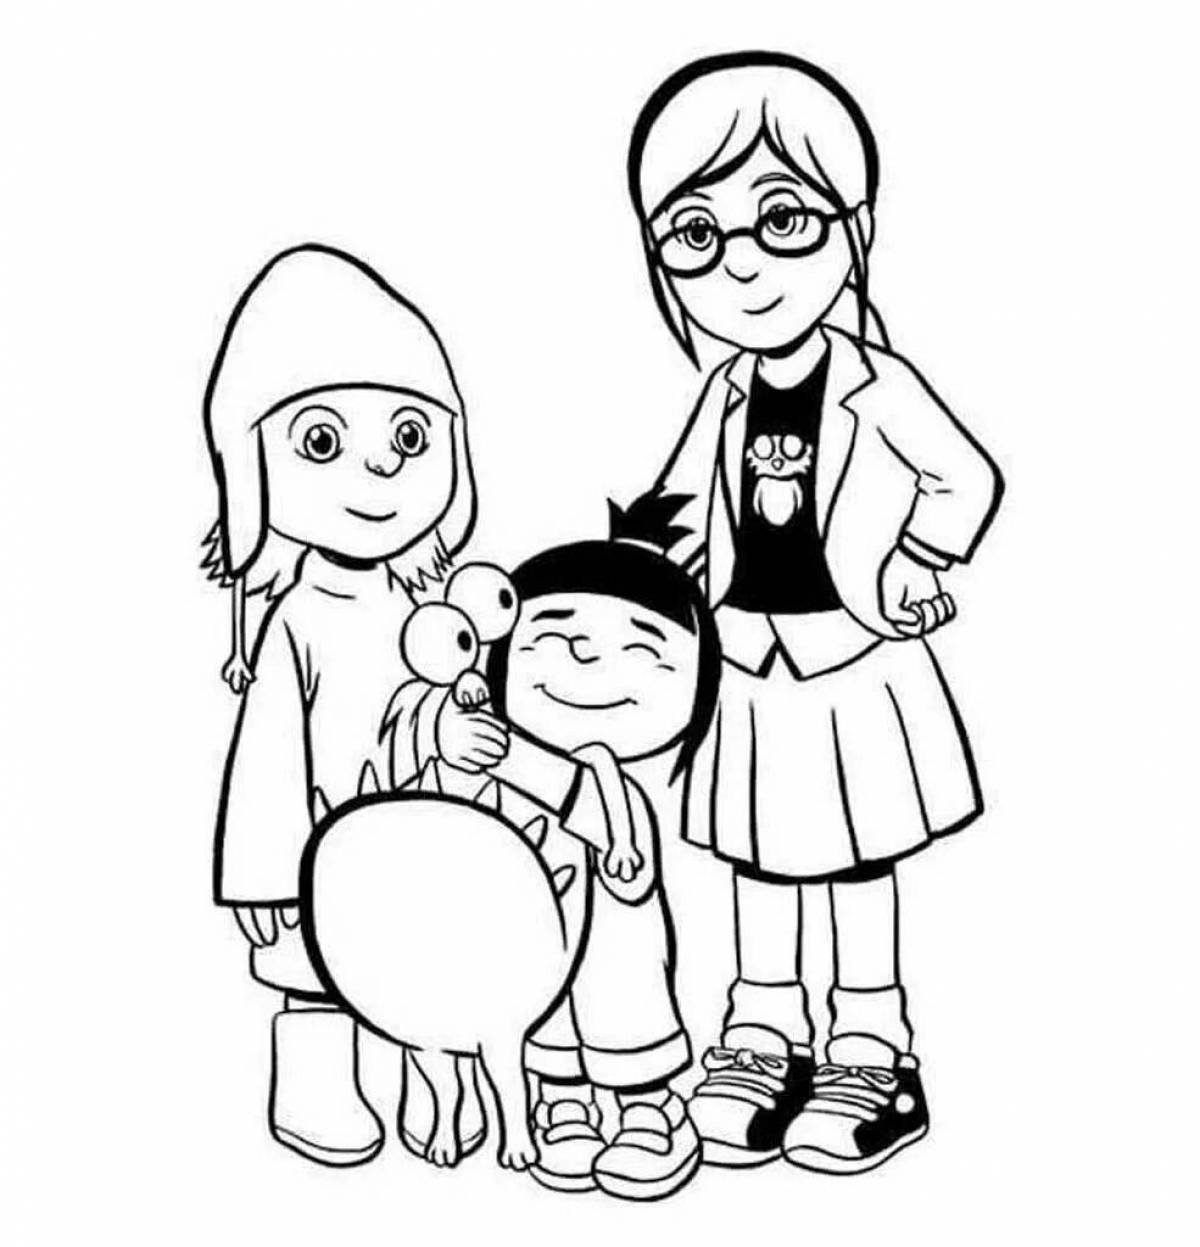 Colorful matchmaker coloring page